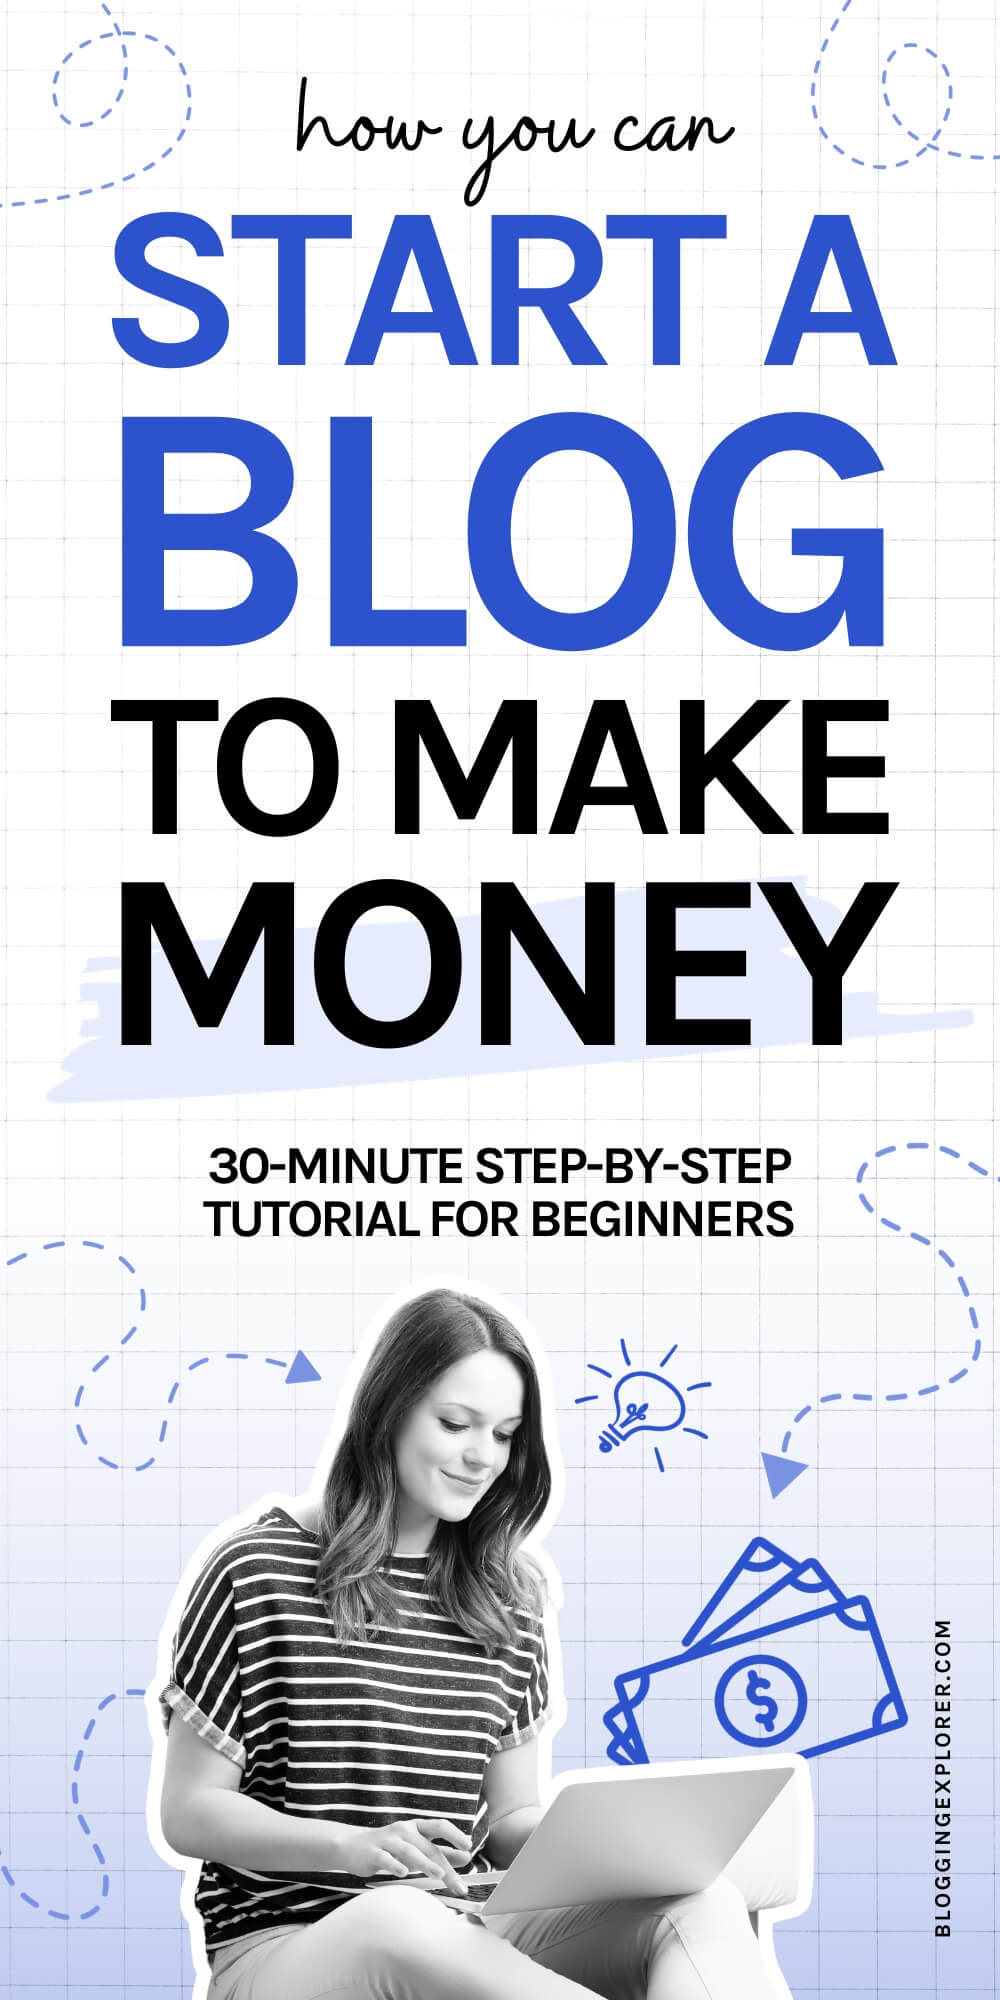 How you can start a blog to make money – 30-minute step-by-step tutorial for beginners